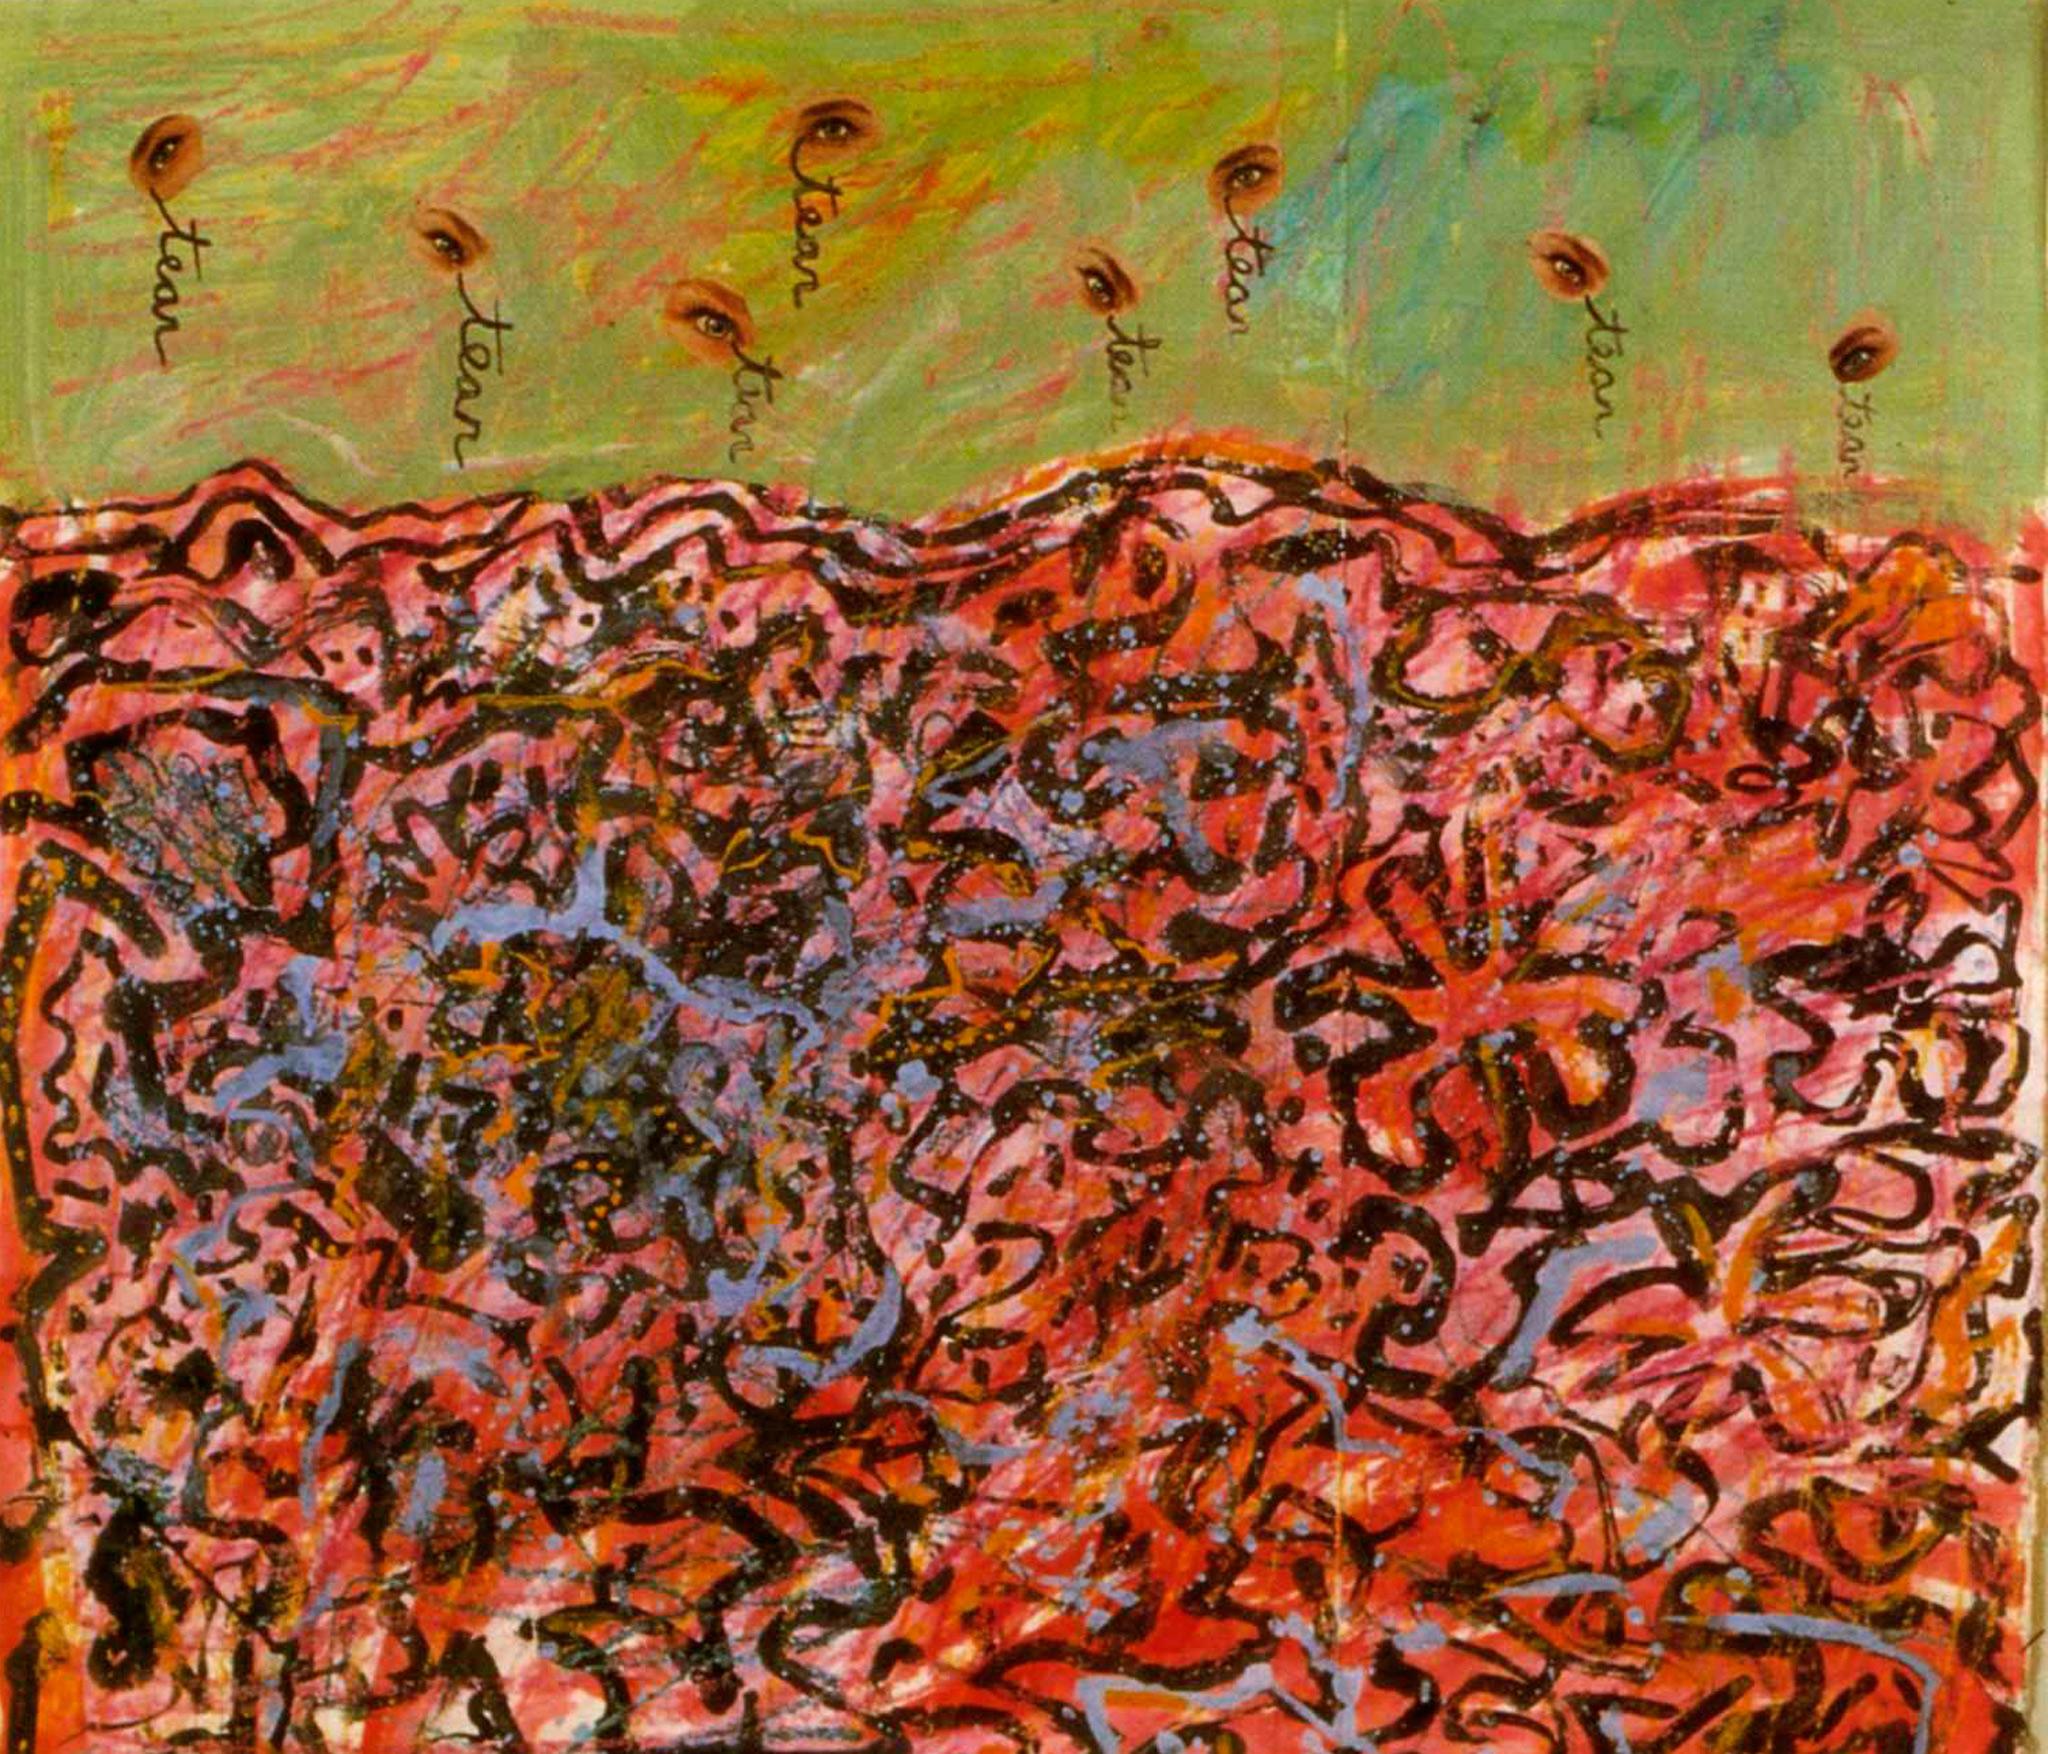 painting of a red messy ground with a green sky and the word 'tear' coming out of eyeballs